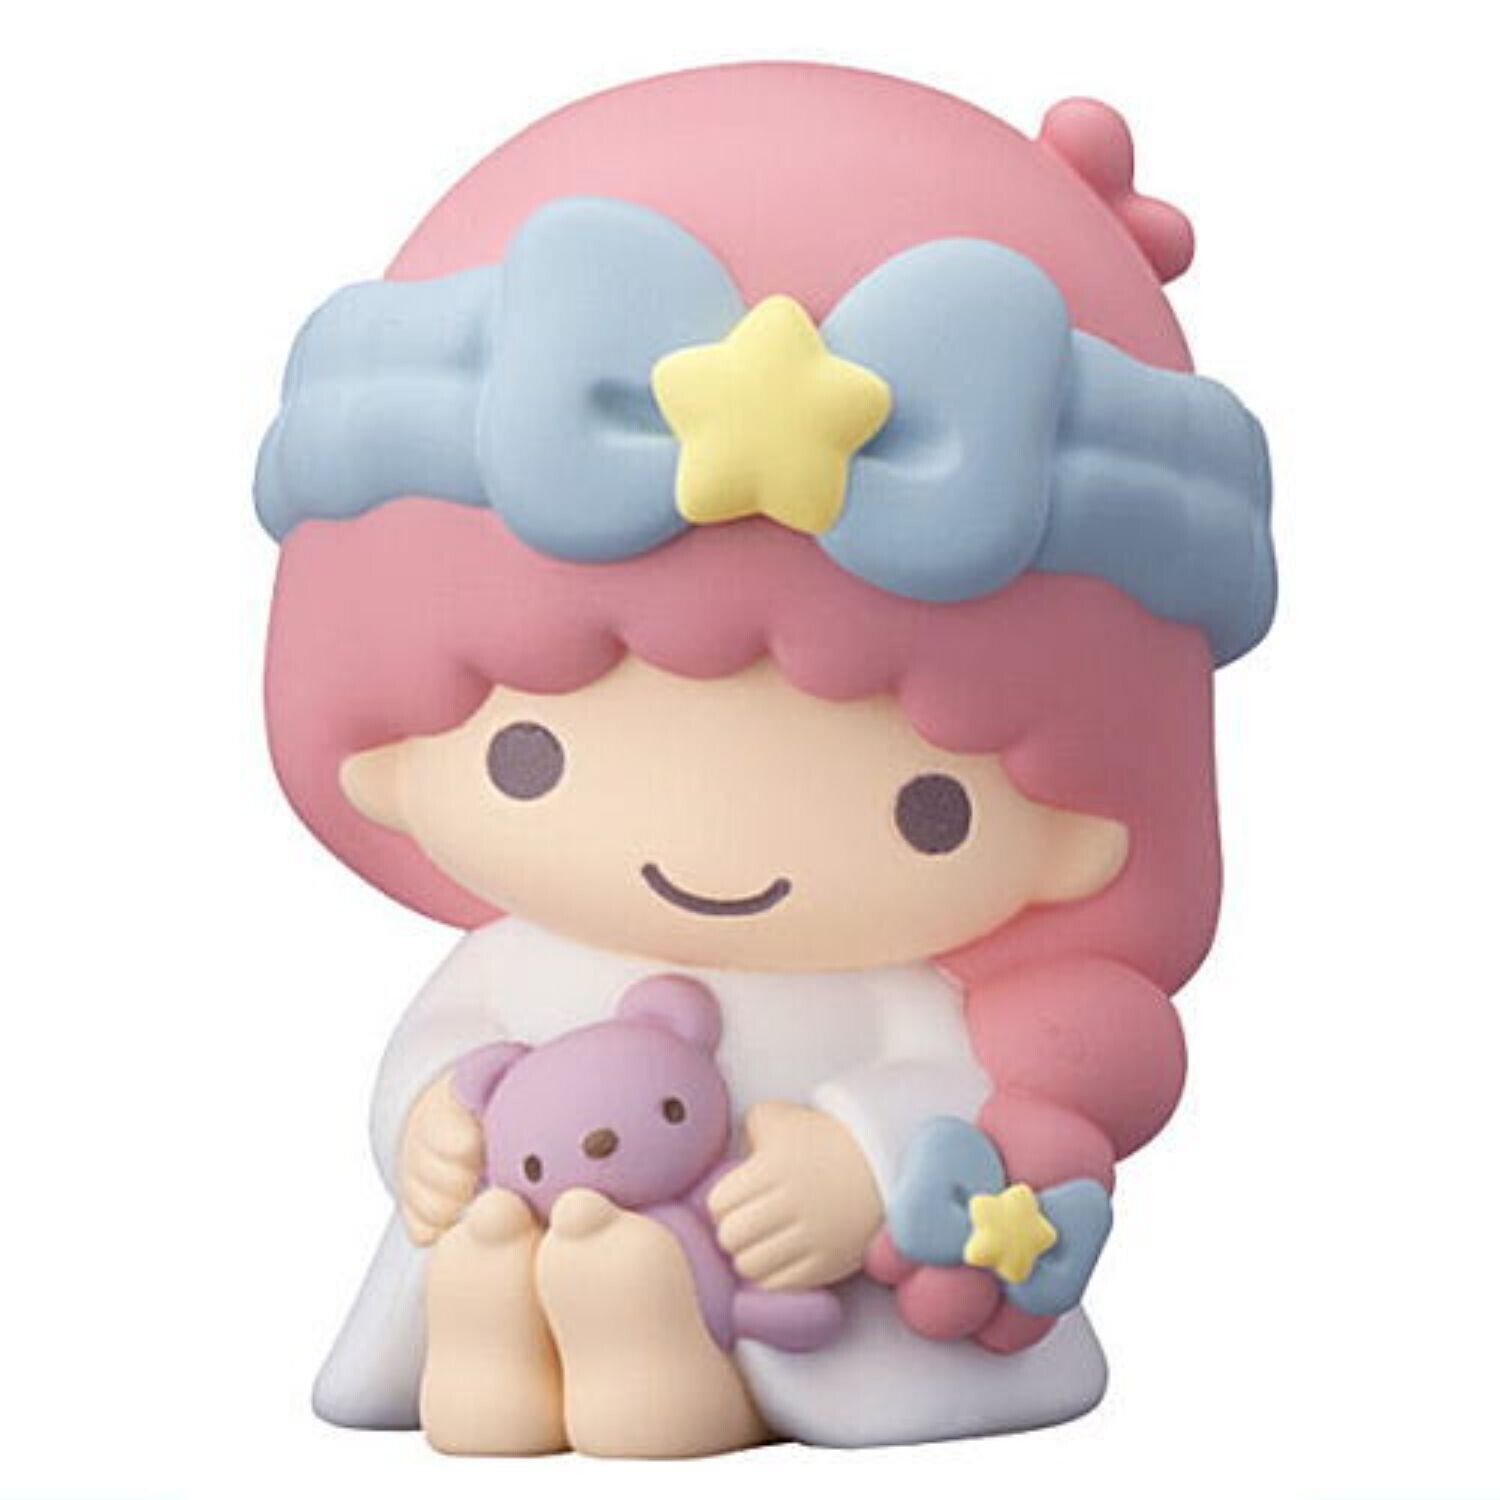 Sanrio Characters Friends 2 BANDAI Collection Toy [3.Little Twin Stars Lala] New